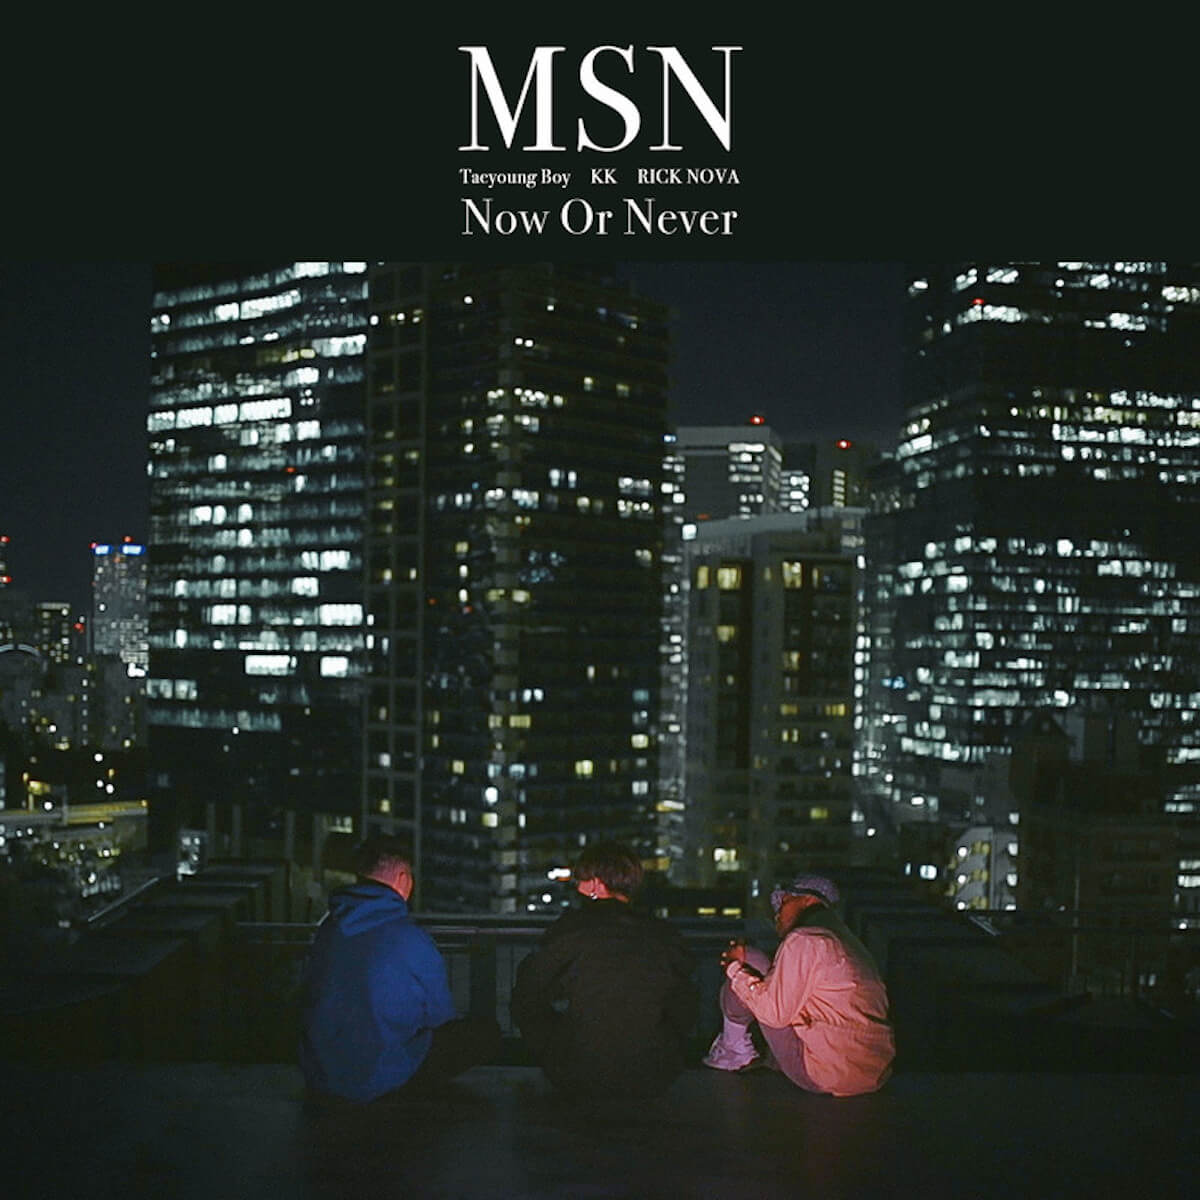 MSN、待望の新曲「Now or Never」はもう聴いた？ f5e6f12f3353a5830d6ba540b96133d3